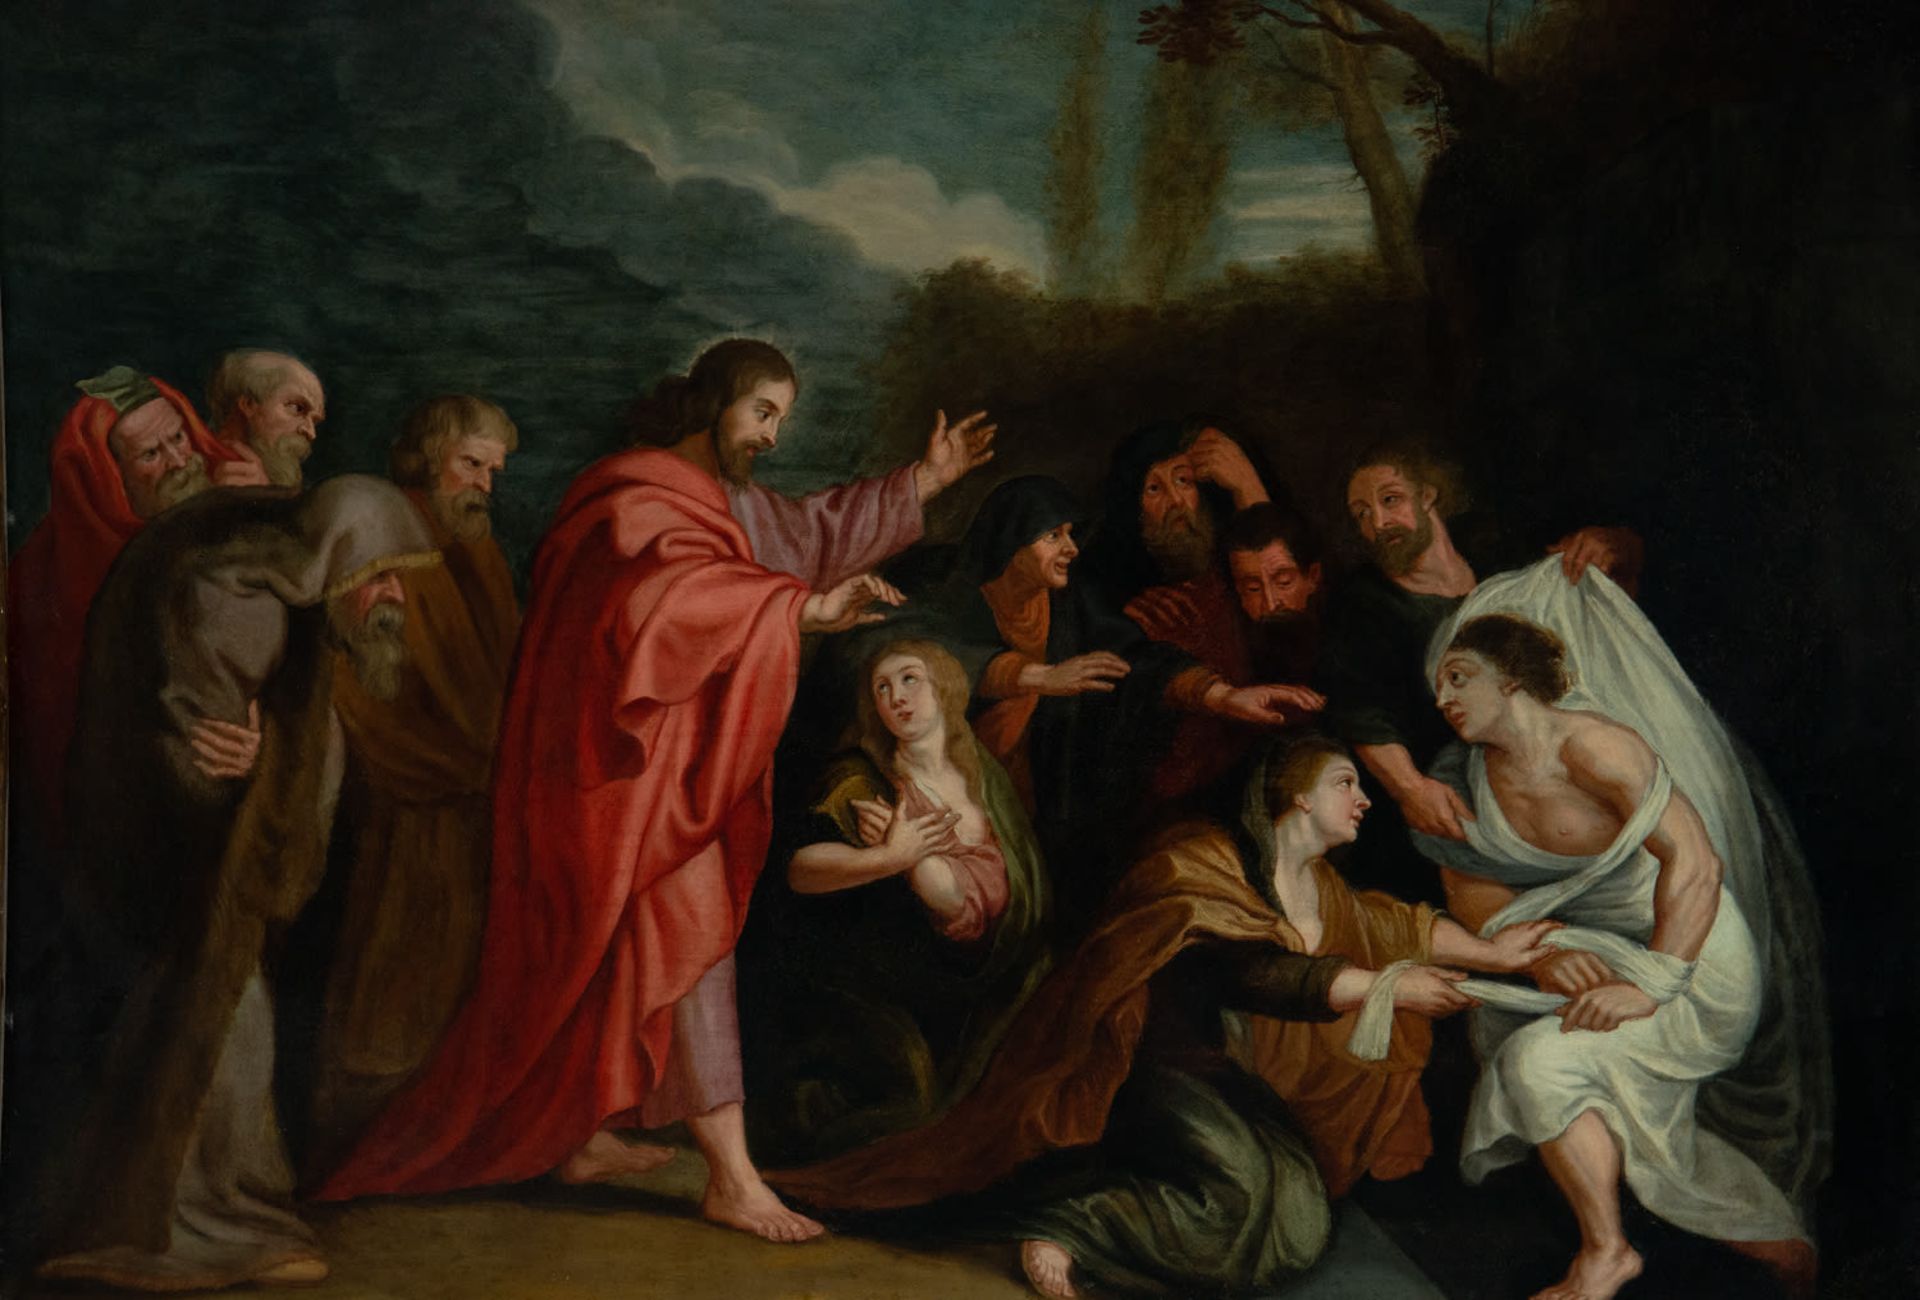 Jesus preaching in the Temple, and the Miracle of Saint Lazarus, 17th century Flemish school - Image 3 of 16